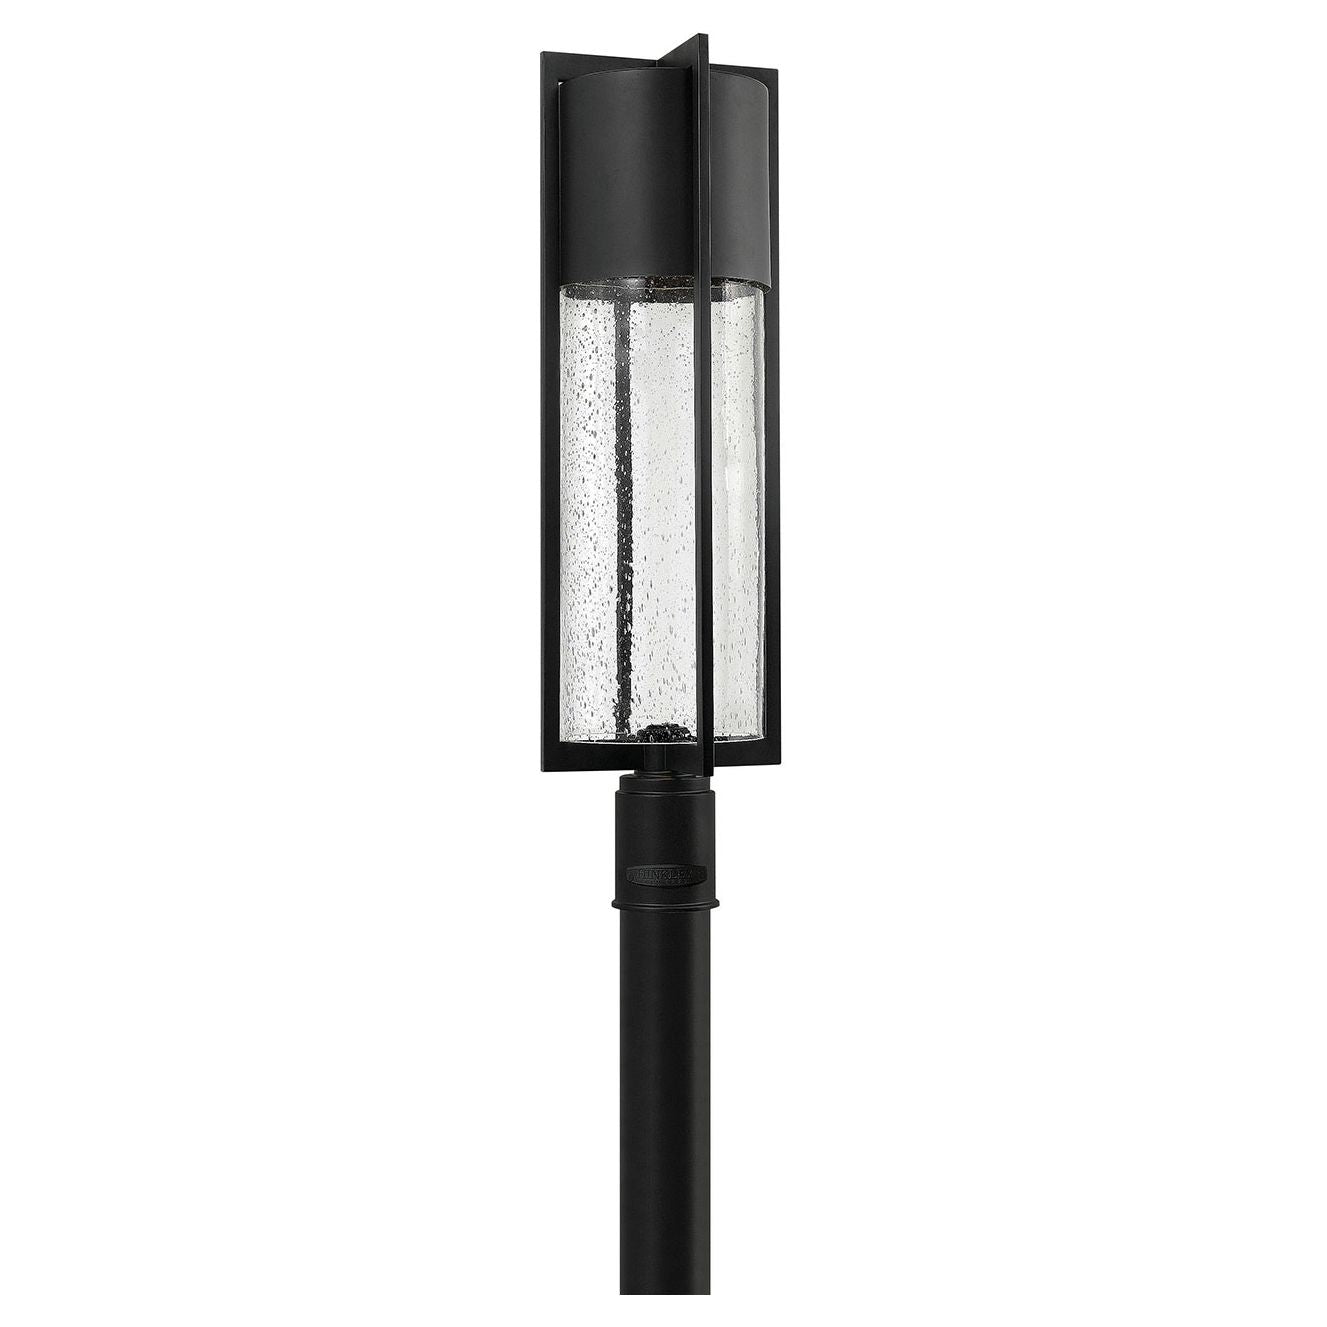 Hinkley 1321-LV - Shelter 28" Tall Post or Pier Mount Lantern, Low Voltage